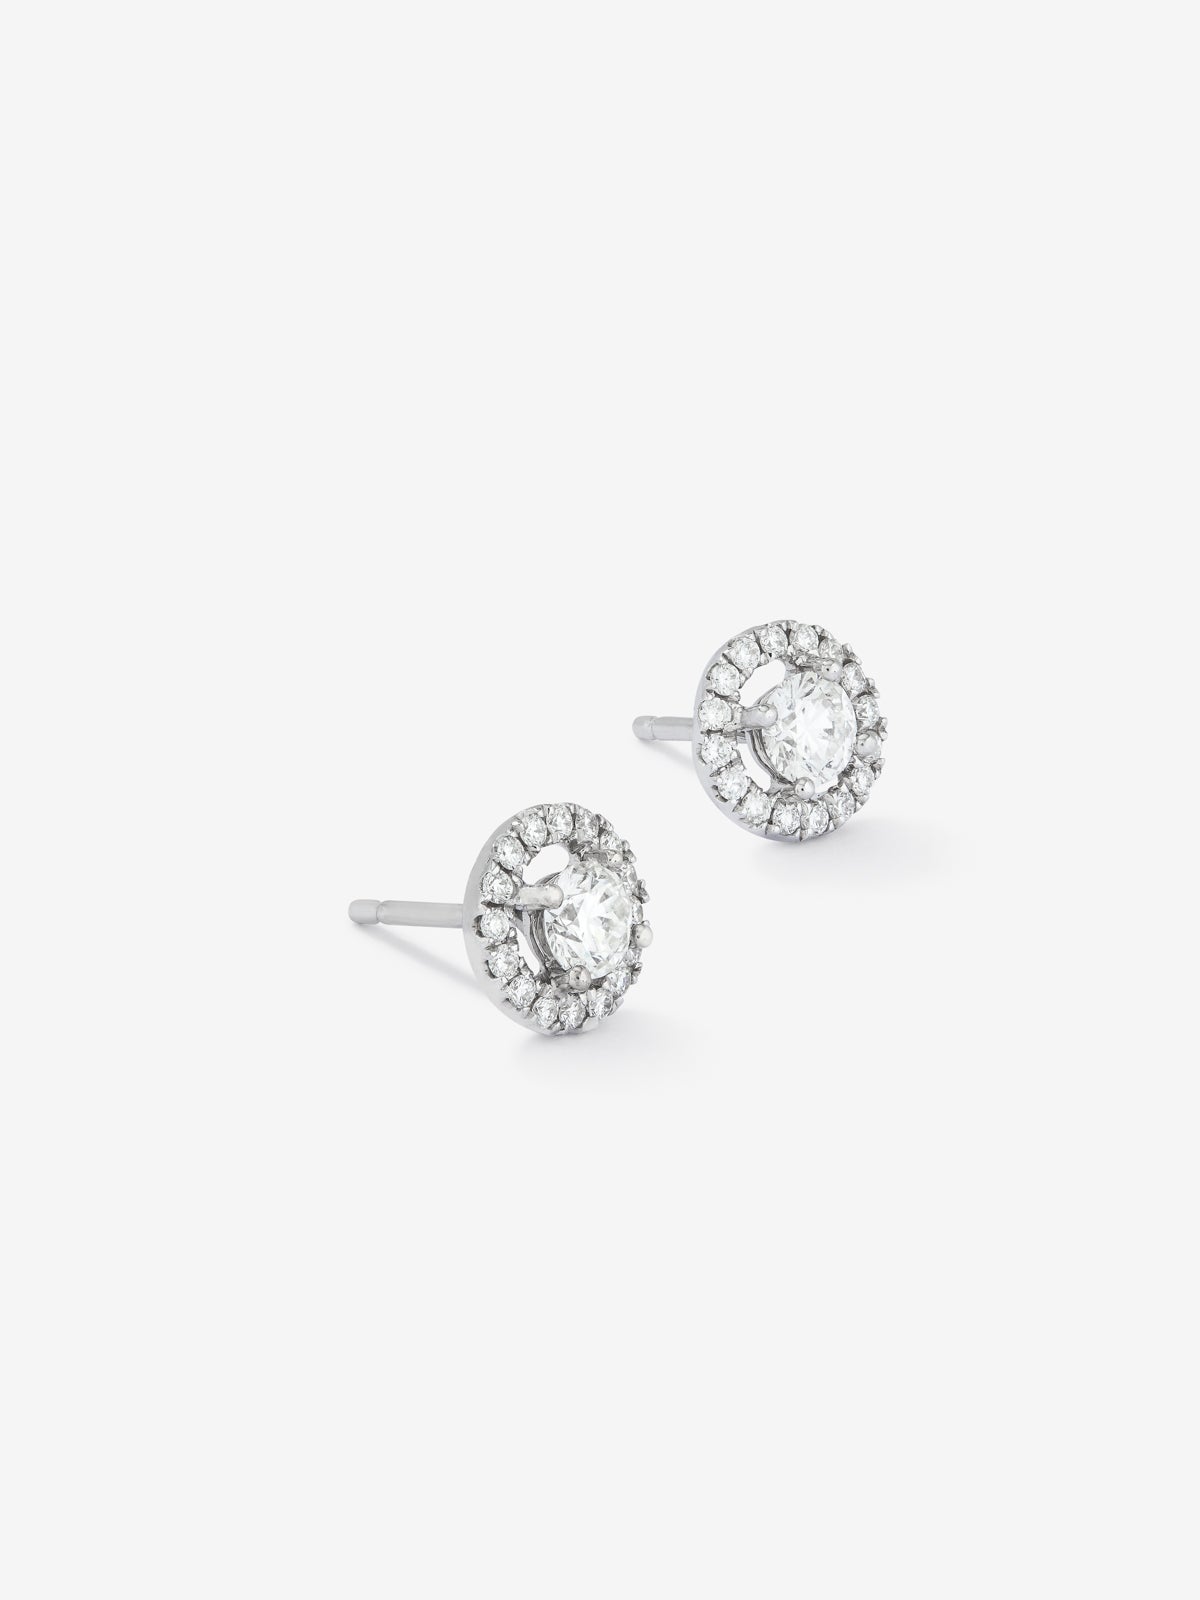 18K white gold earrings with two central brilliant-cut diamonds with a total of 0.4 cts and a border of 30 brilliant-cut diamonds of 0.18 cts